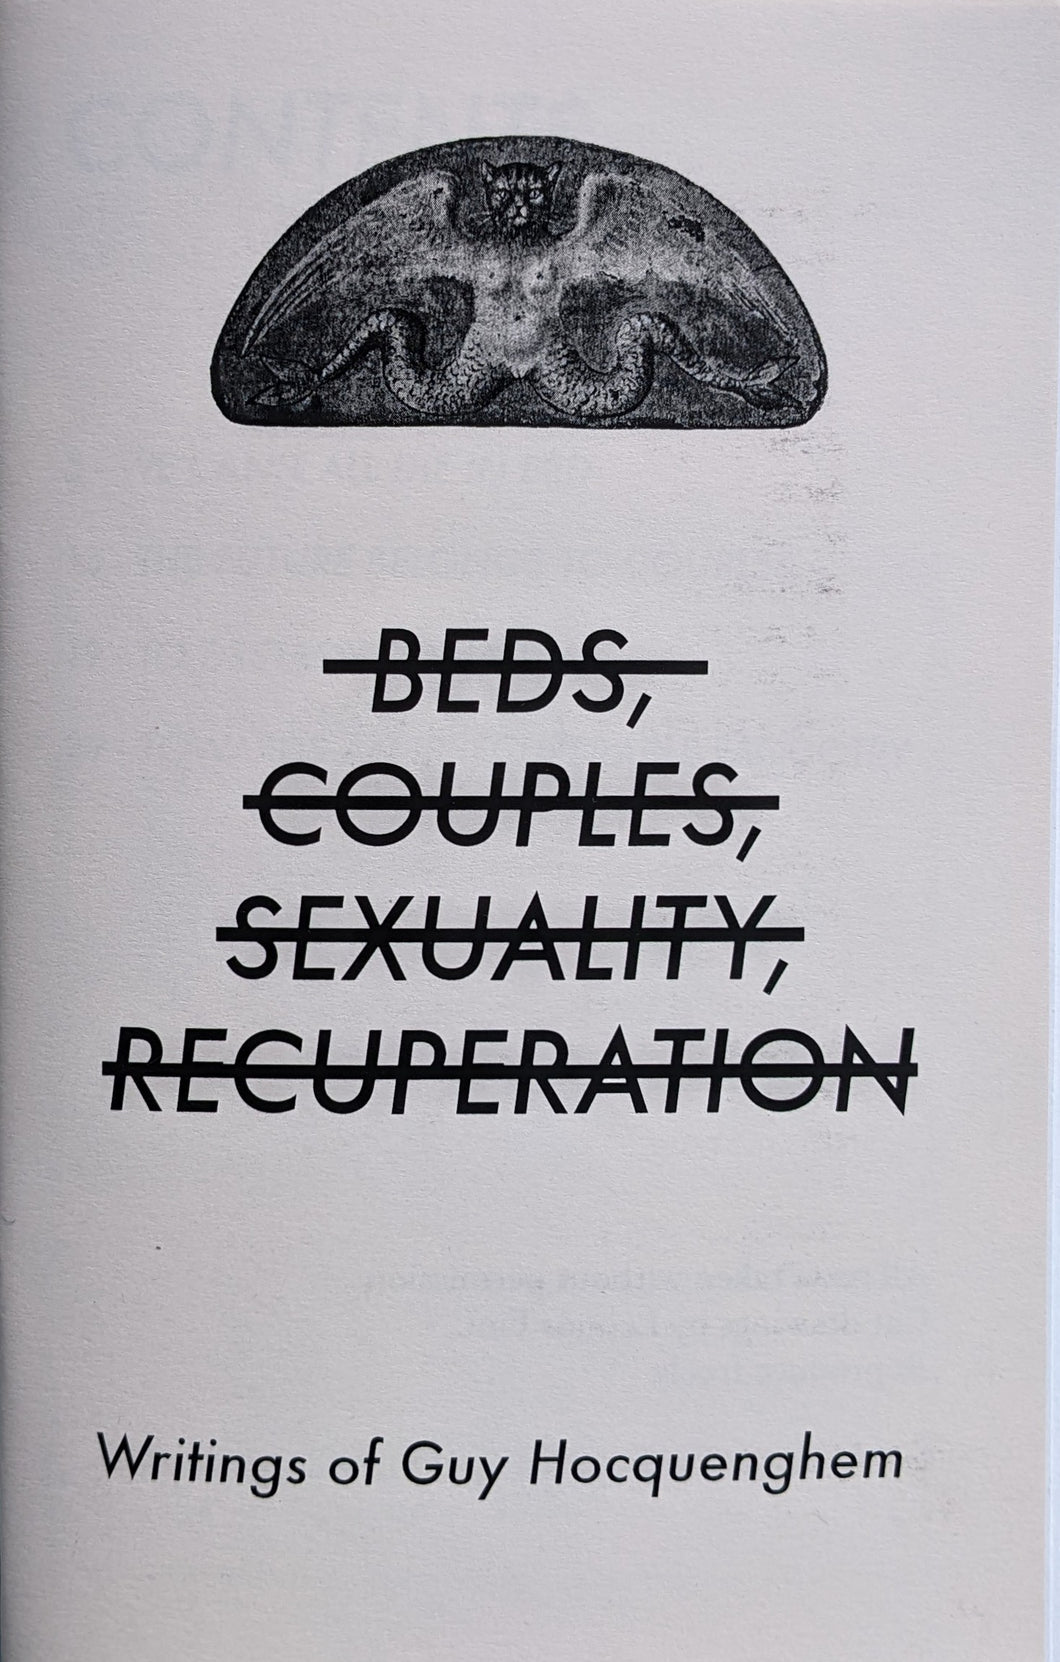 <s>Beds</s>, <s>Couples</s>, <s>Sexuality</s>, <s>Recuperation</s>: Writings of Guy Hocquenghem